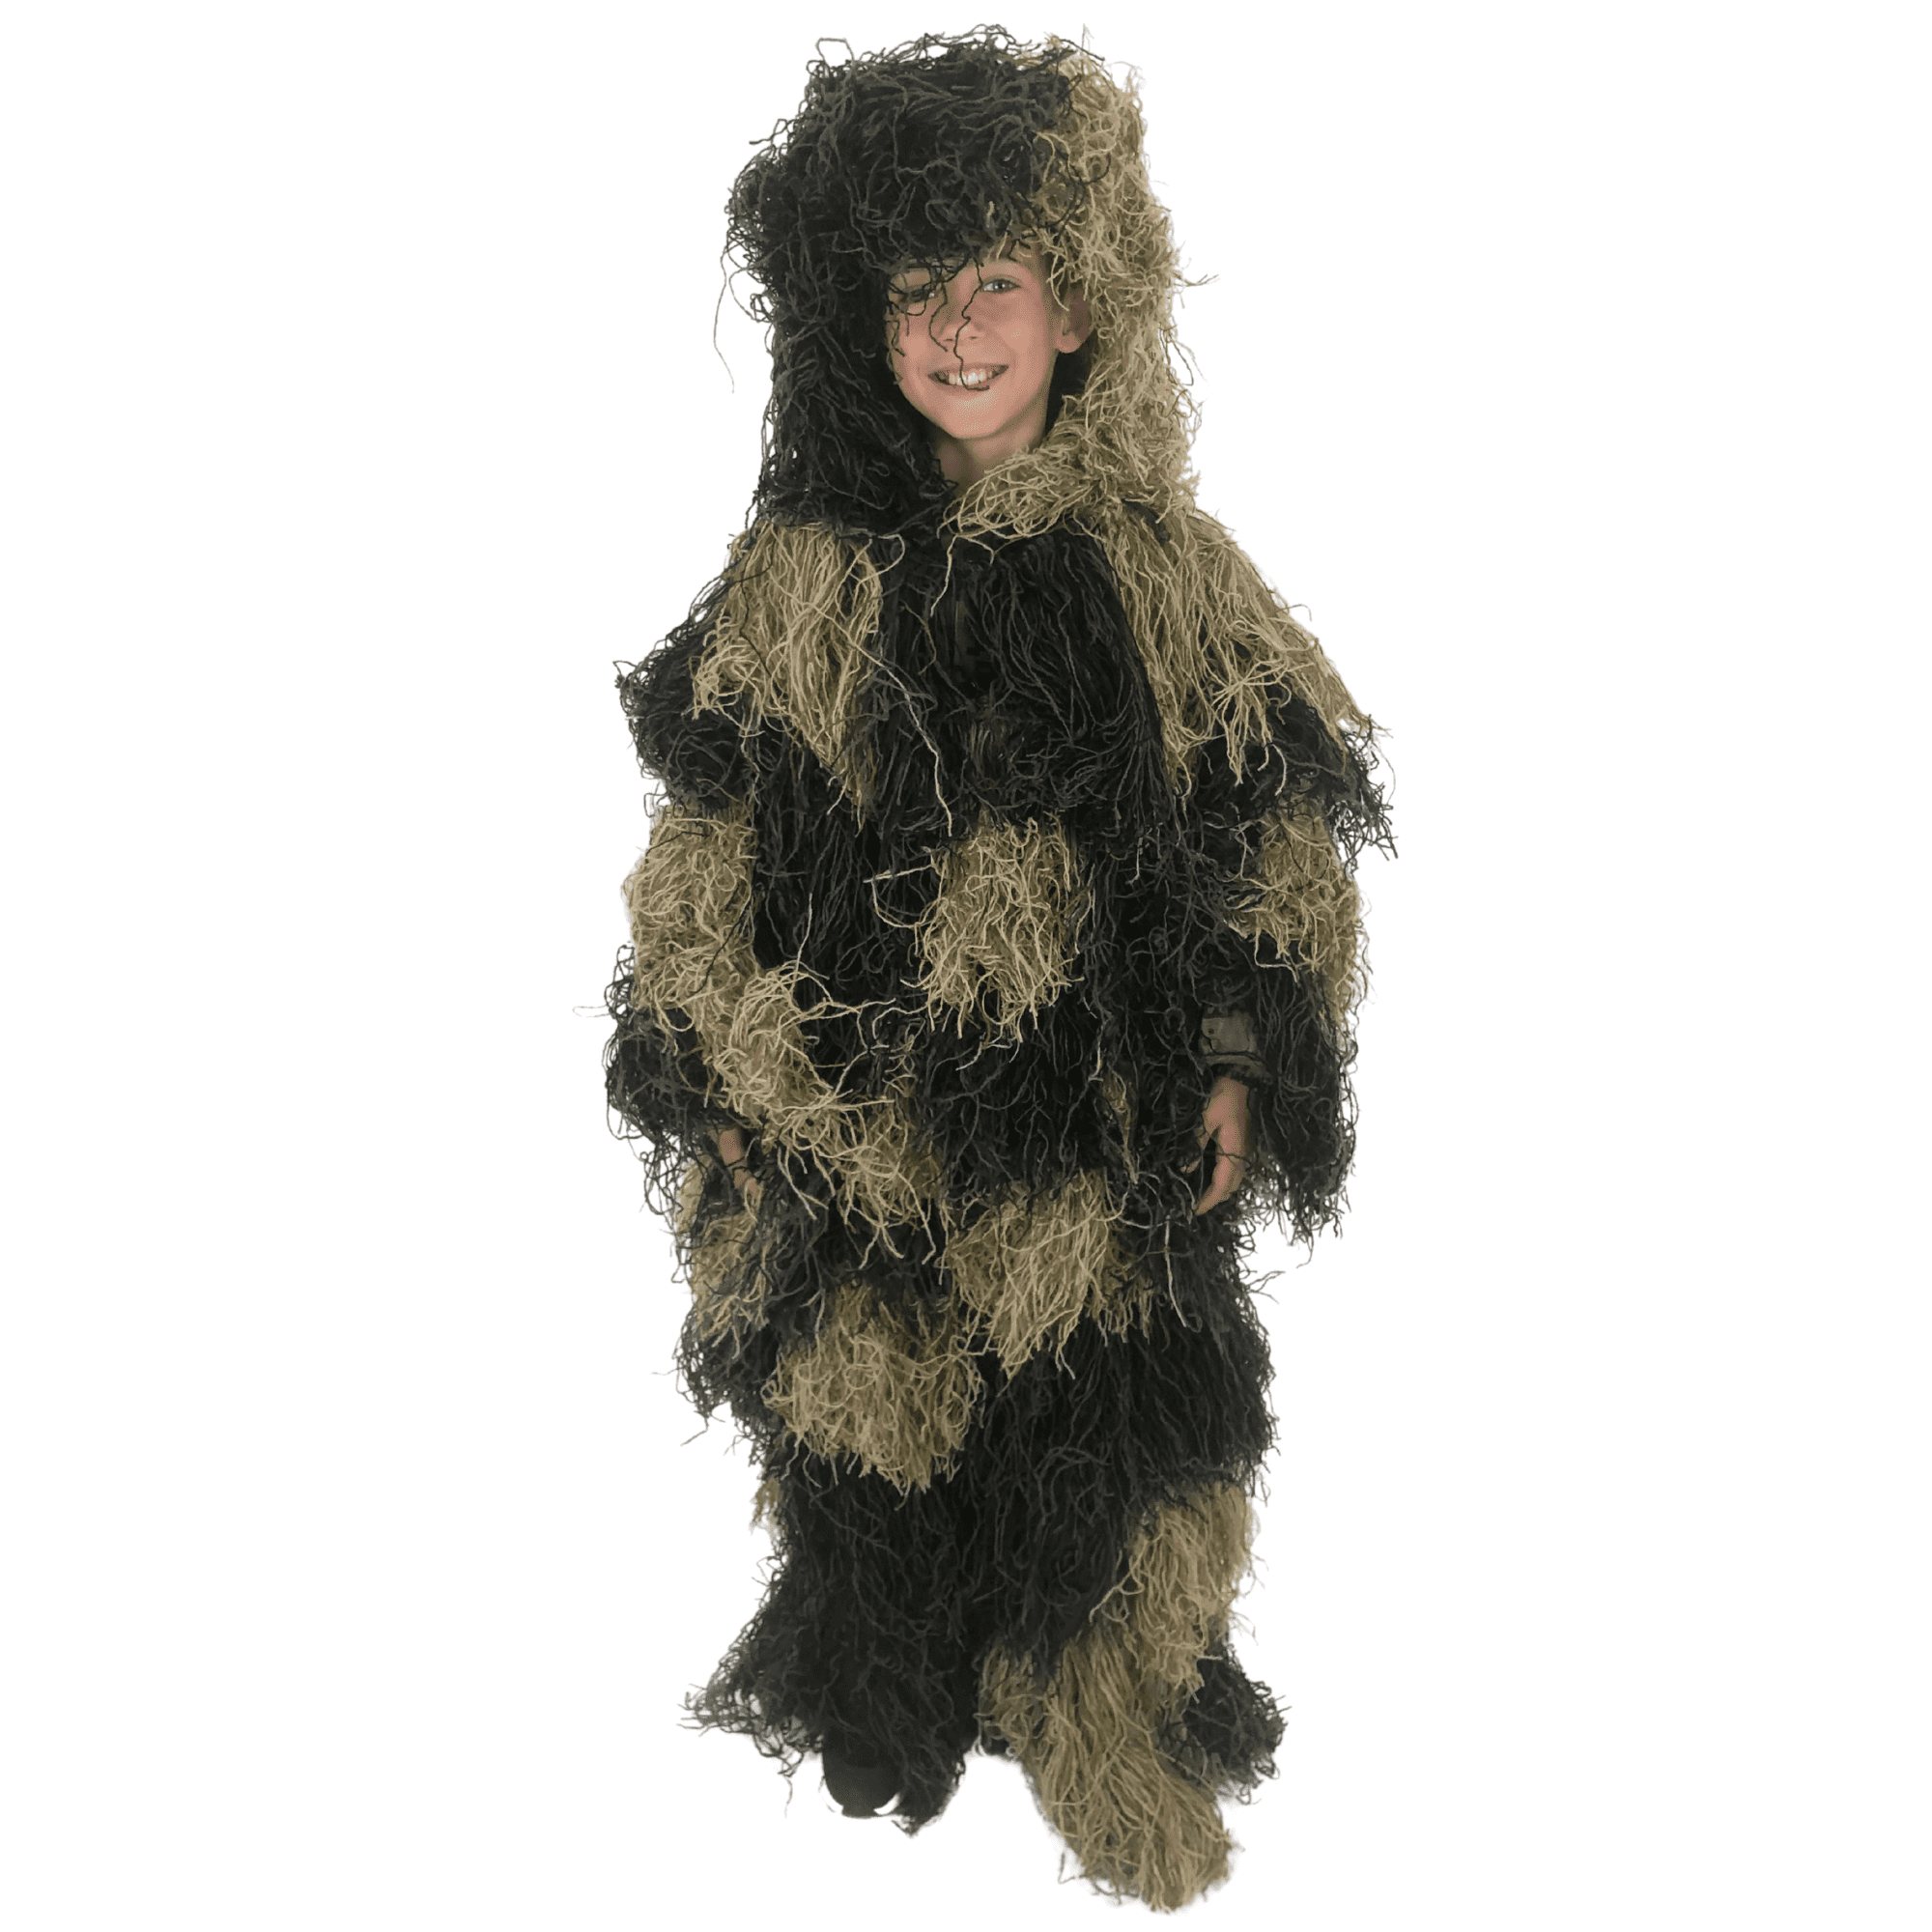 Bag 3D Ghillie Suit for Kids Camo Woodland Camouflage Forest Hunting 4-Piece 